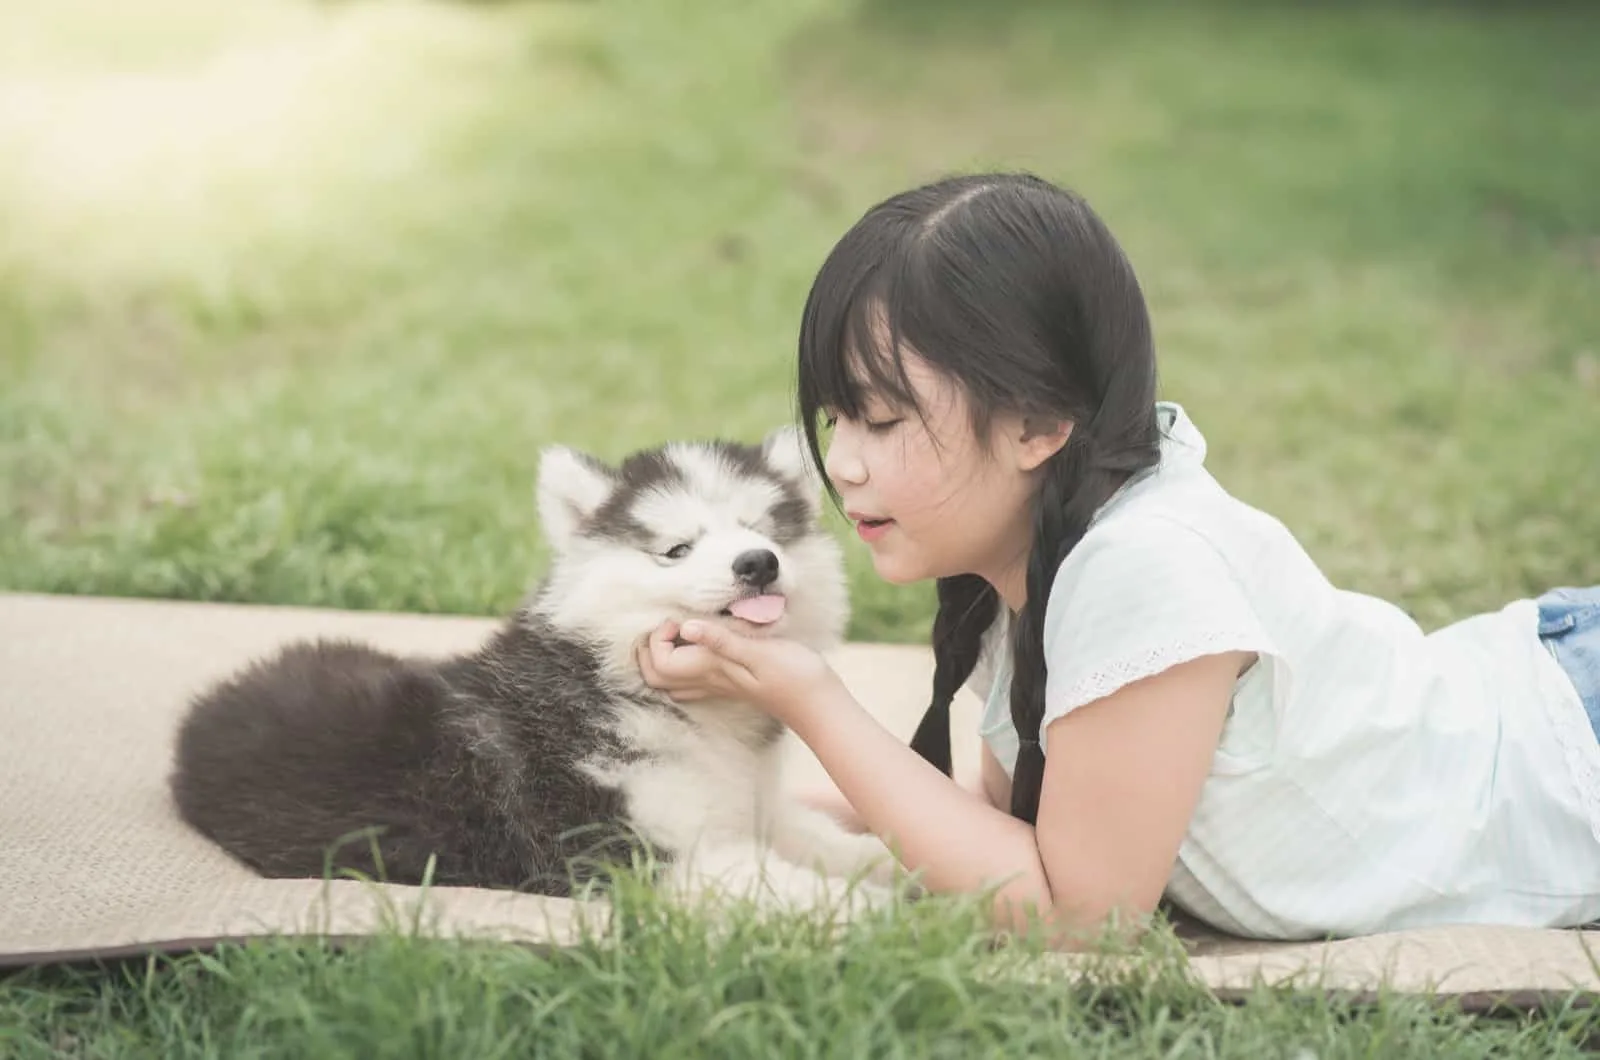 girl playing with her husky puppy